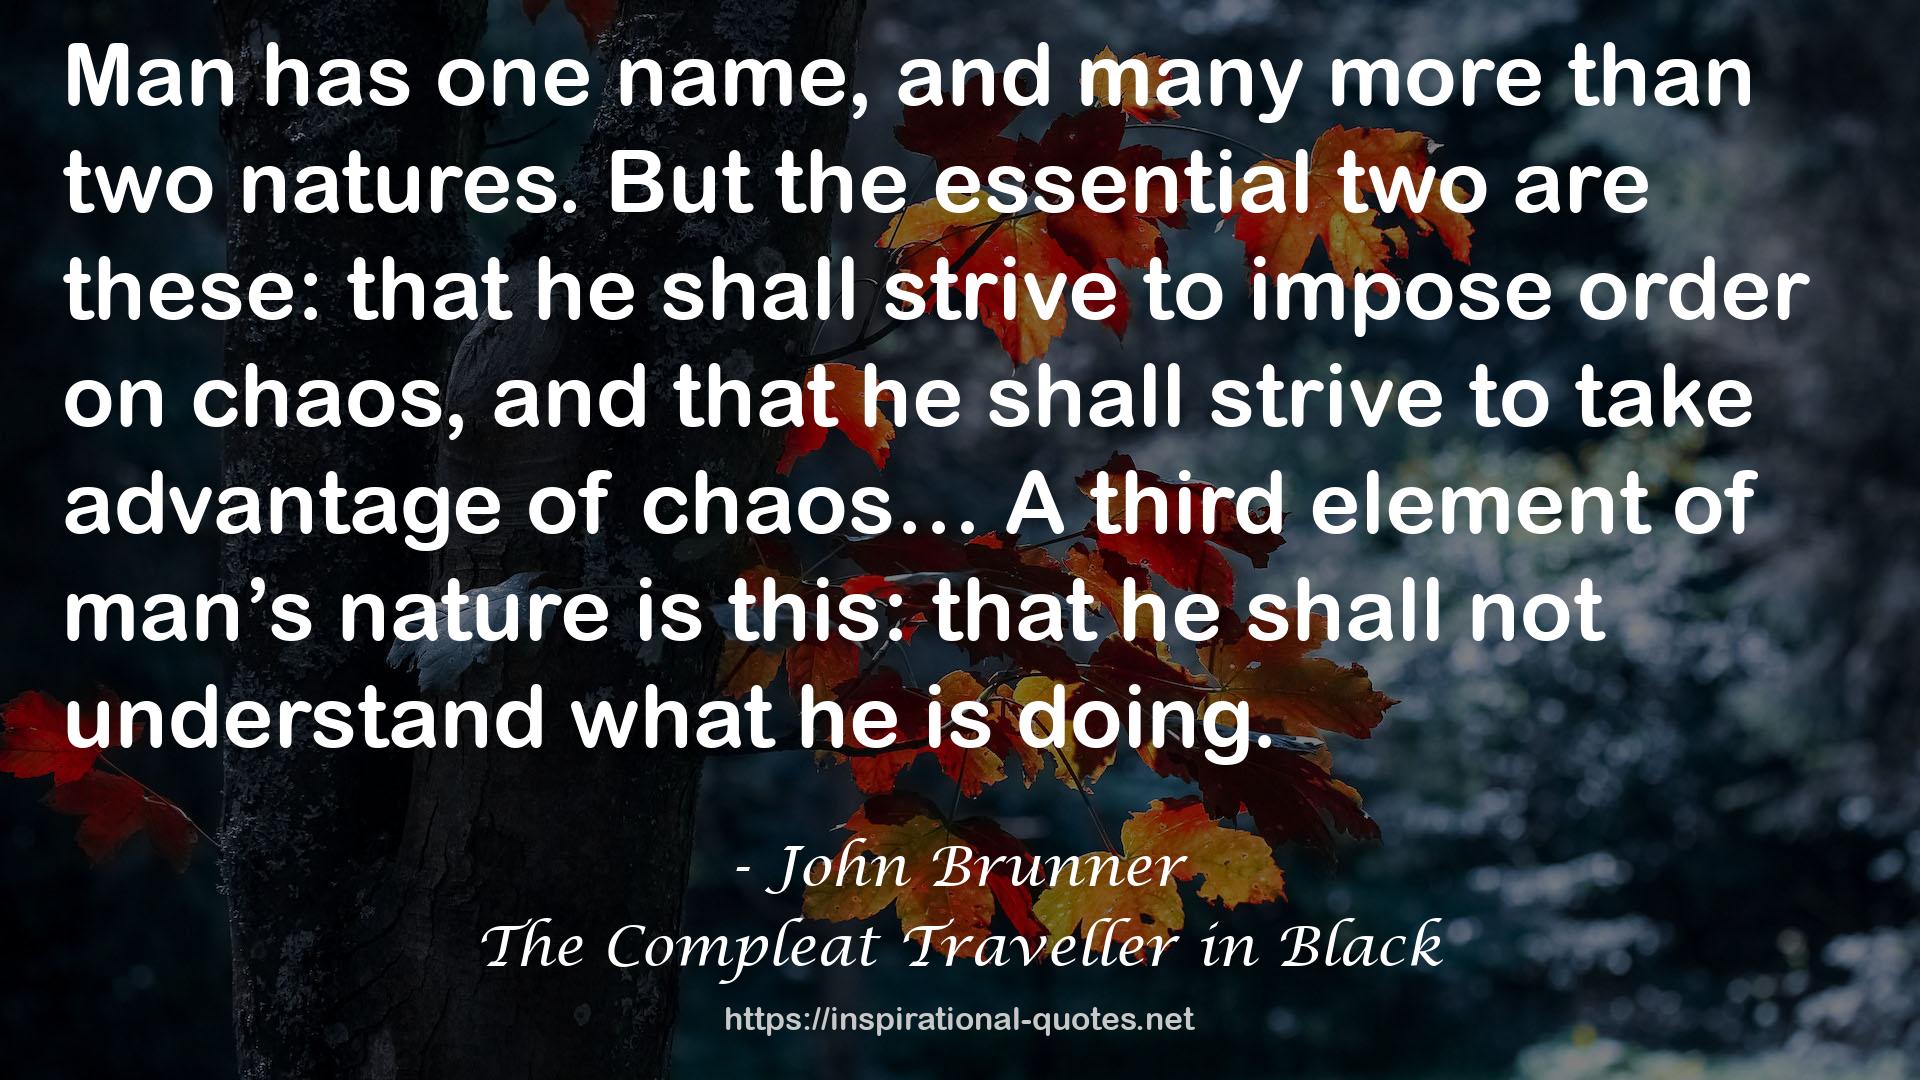 The Compleat Traveller in Black QUOTES